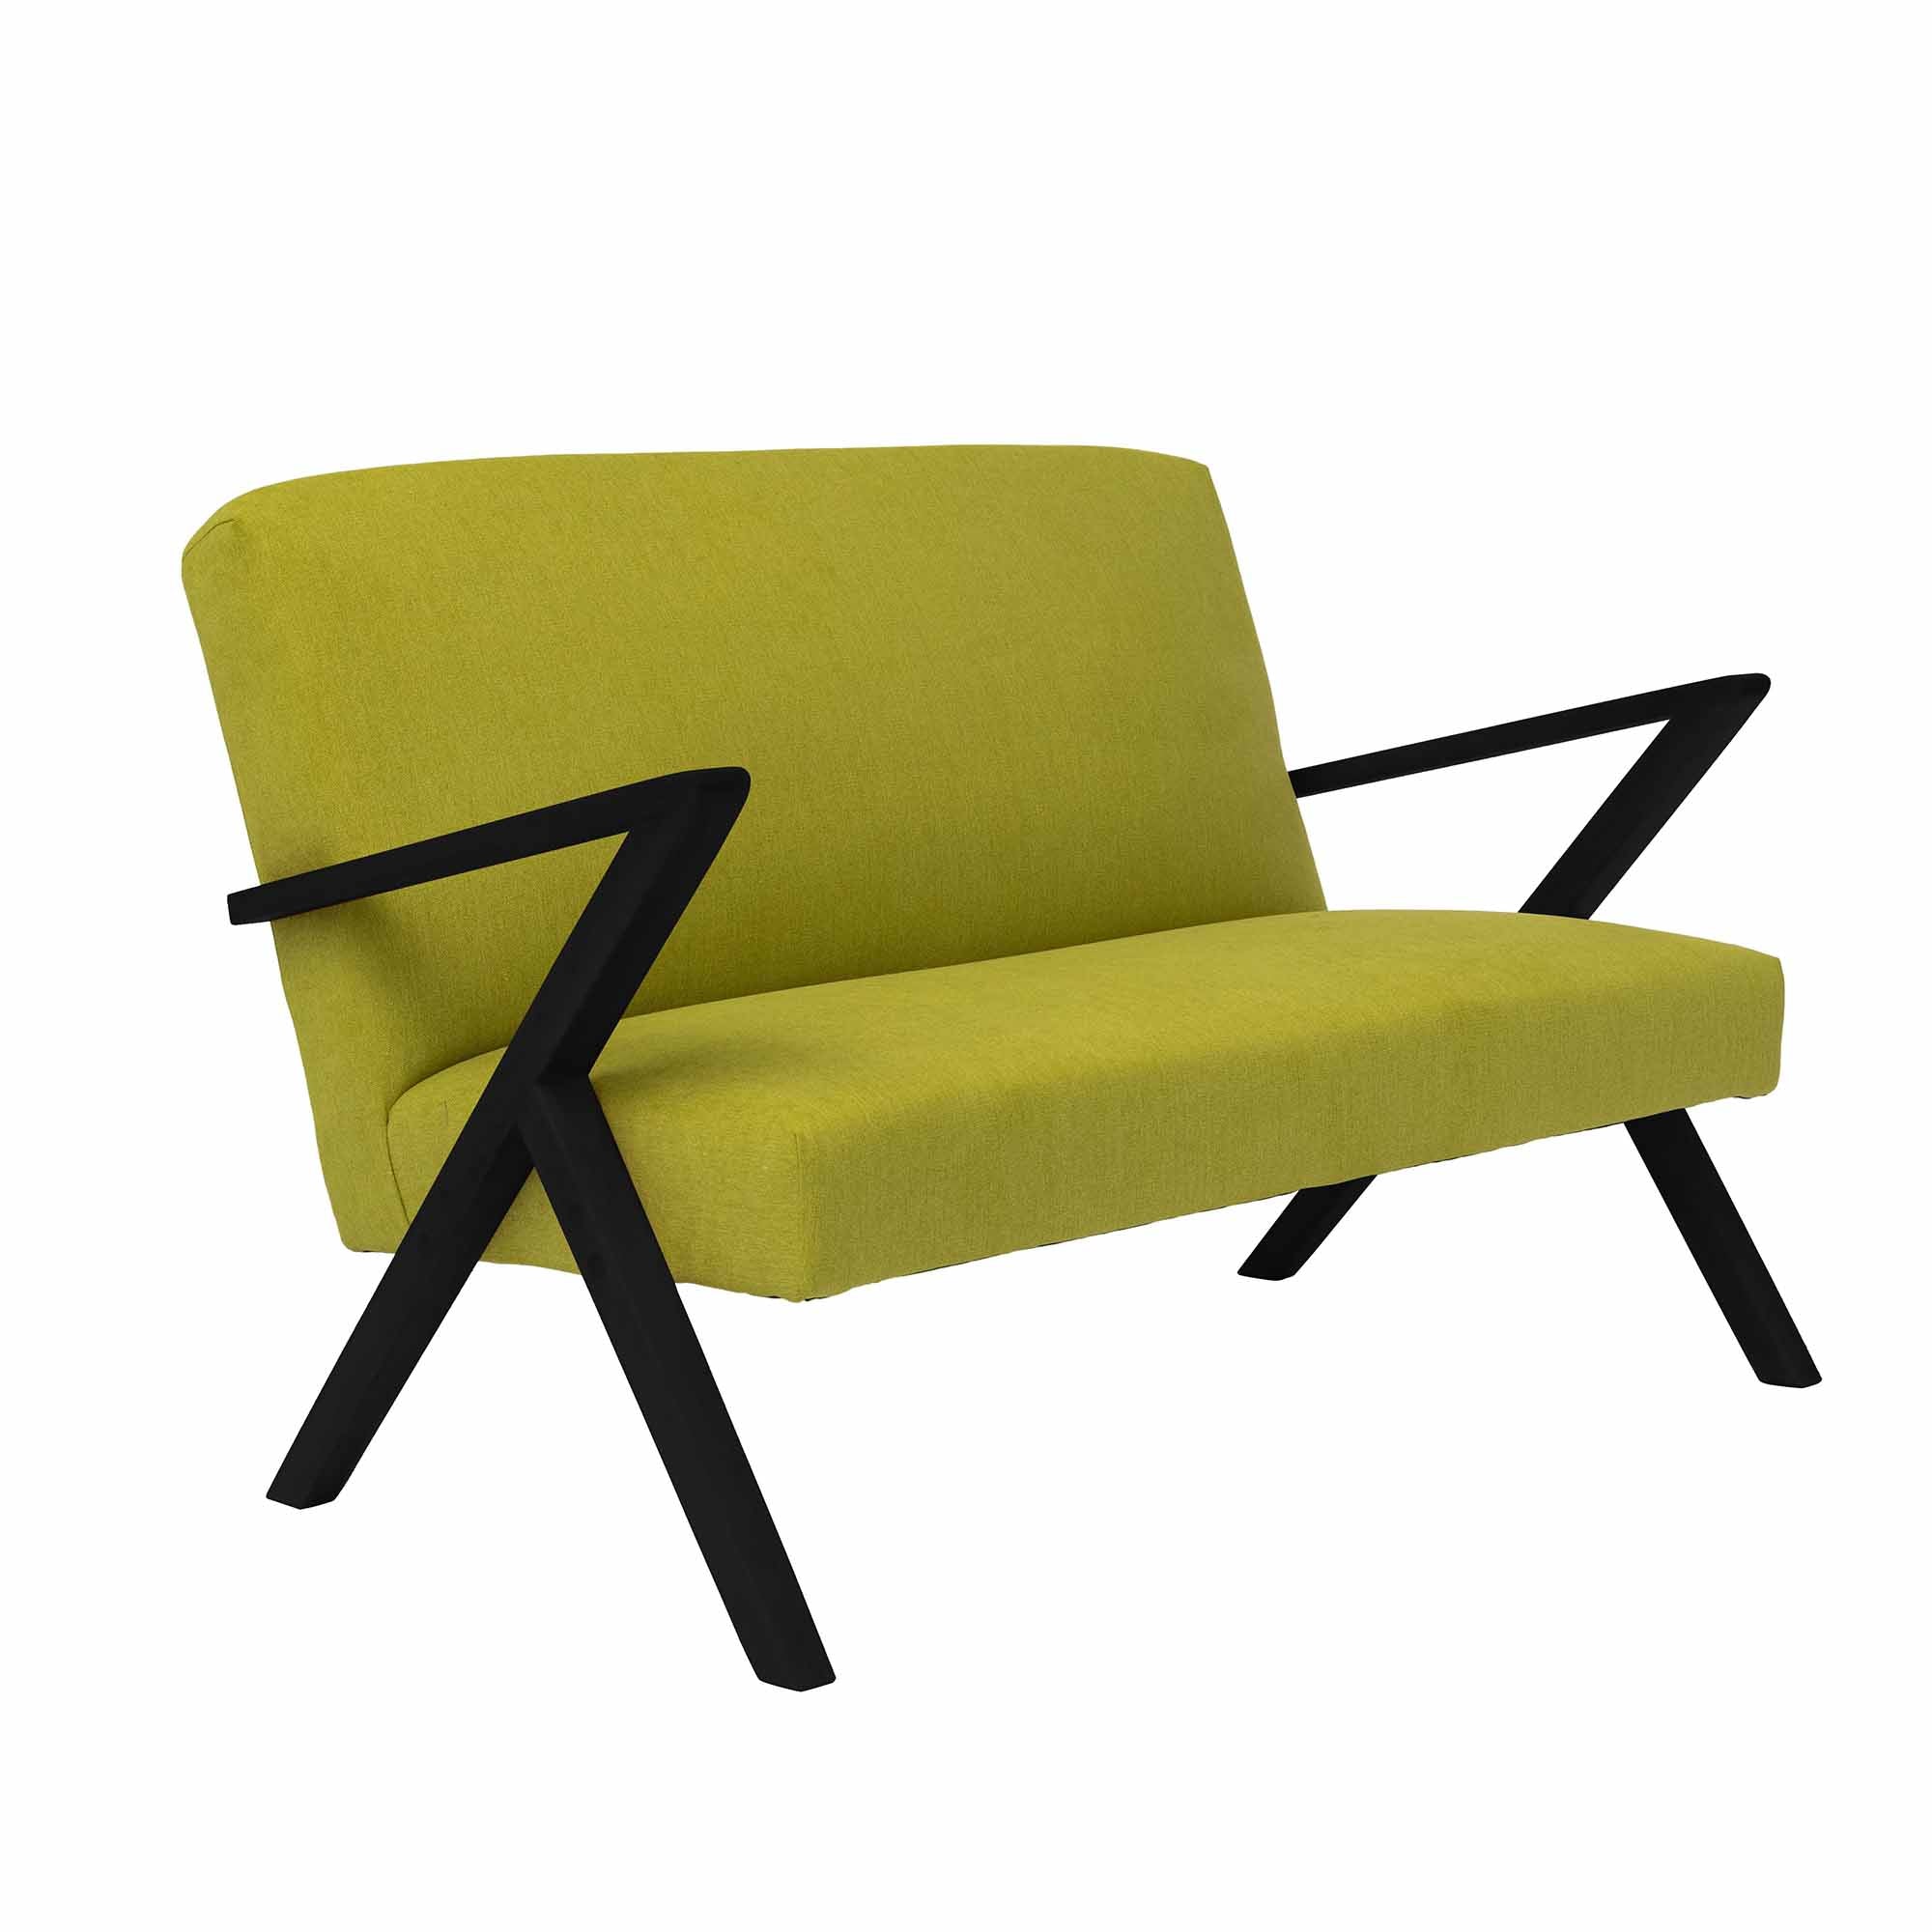 2-Seater Sofa, Beech Wood Frame, Black Lacquered green fabric, half-side view